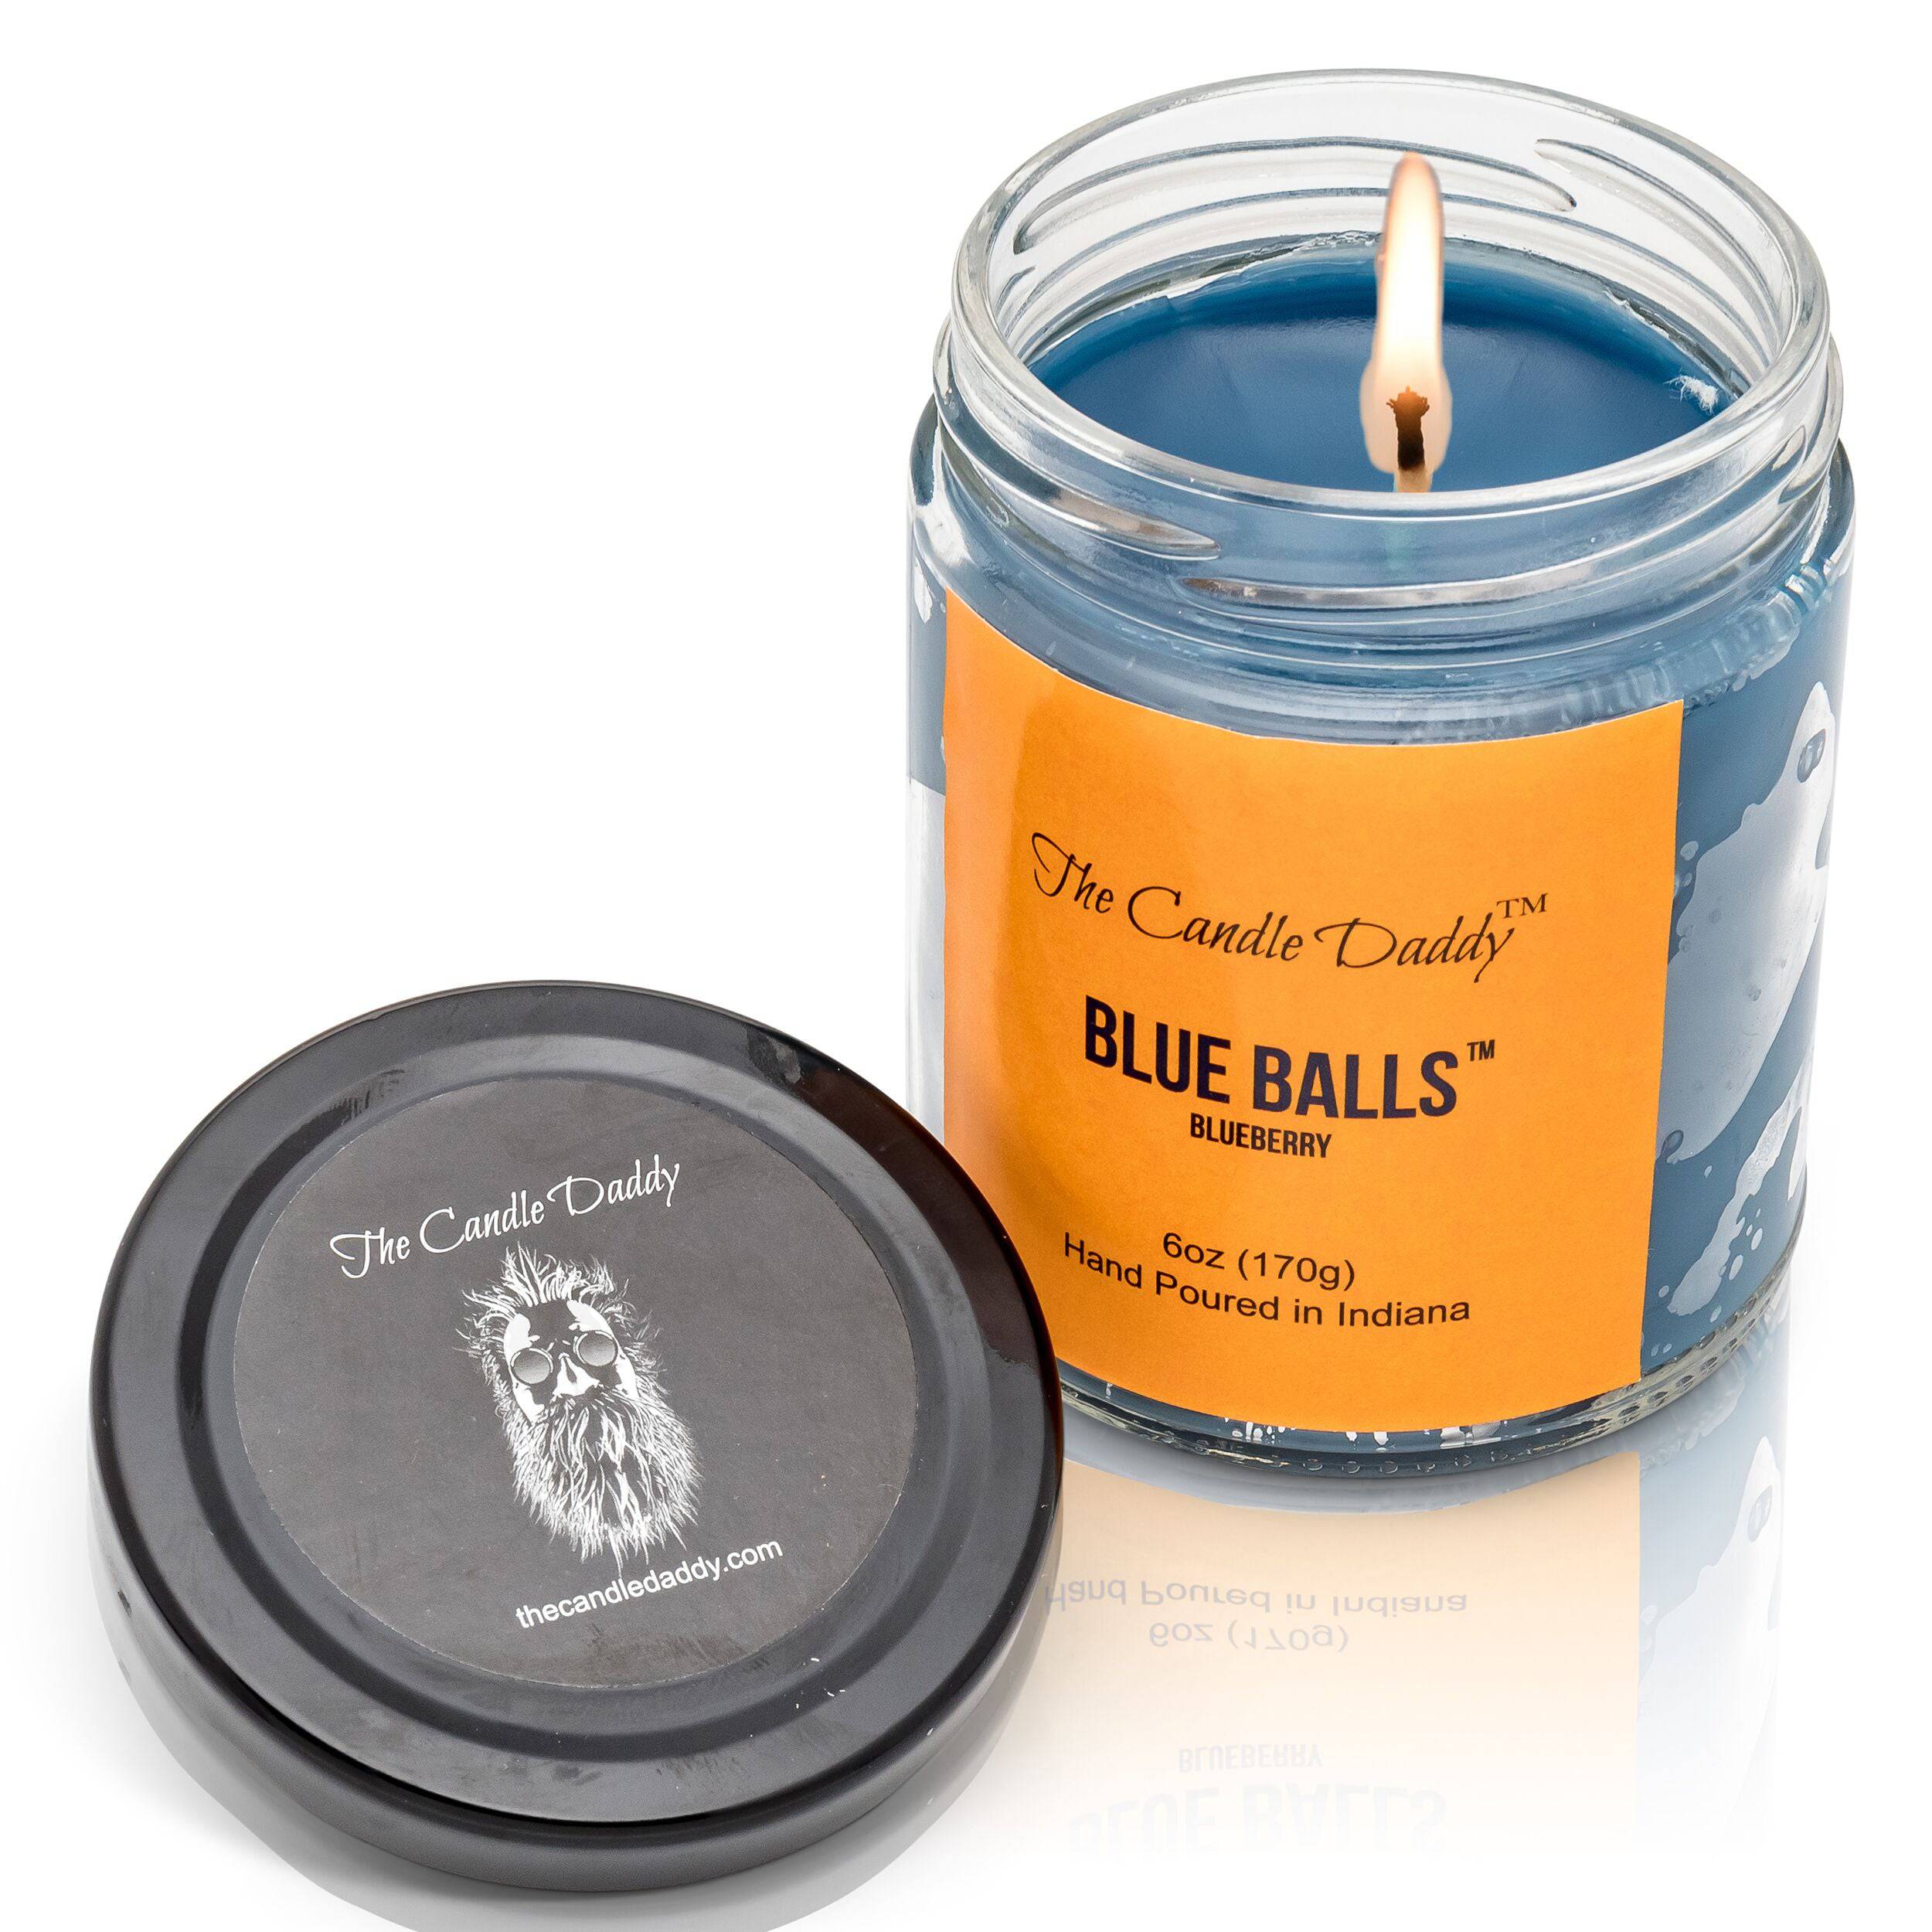 Blue Balls - Blueberry Scented - 6 Ounce Jar Candle - 40 Hour Burn